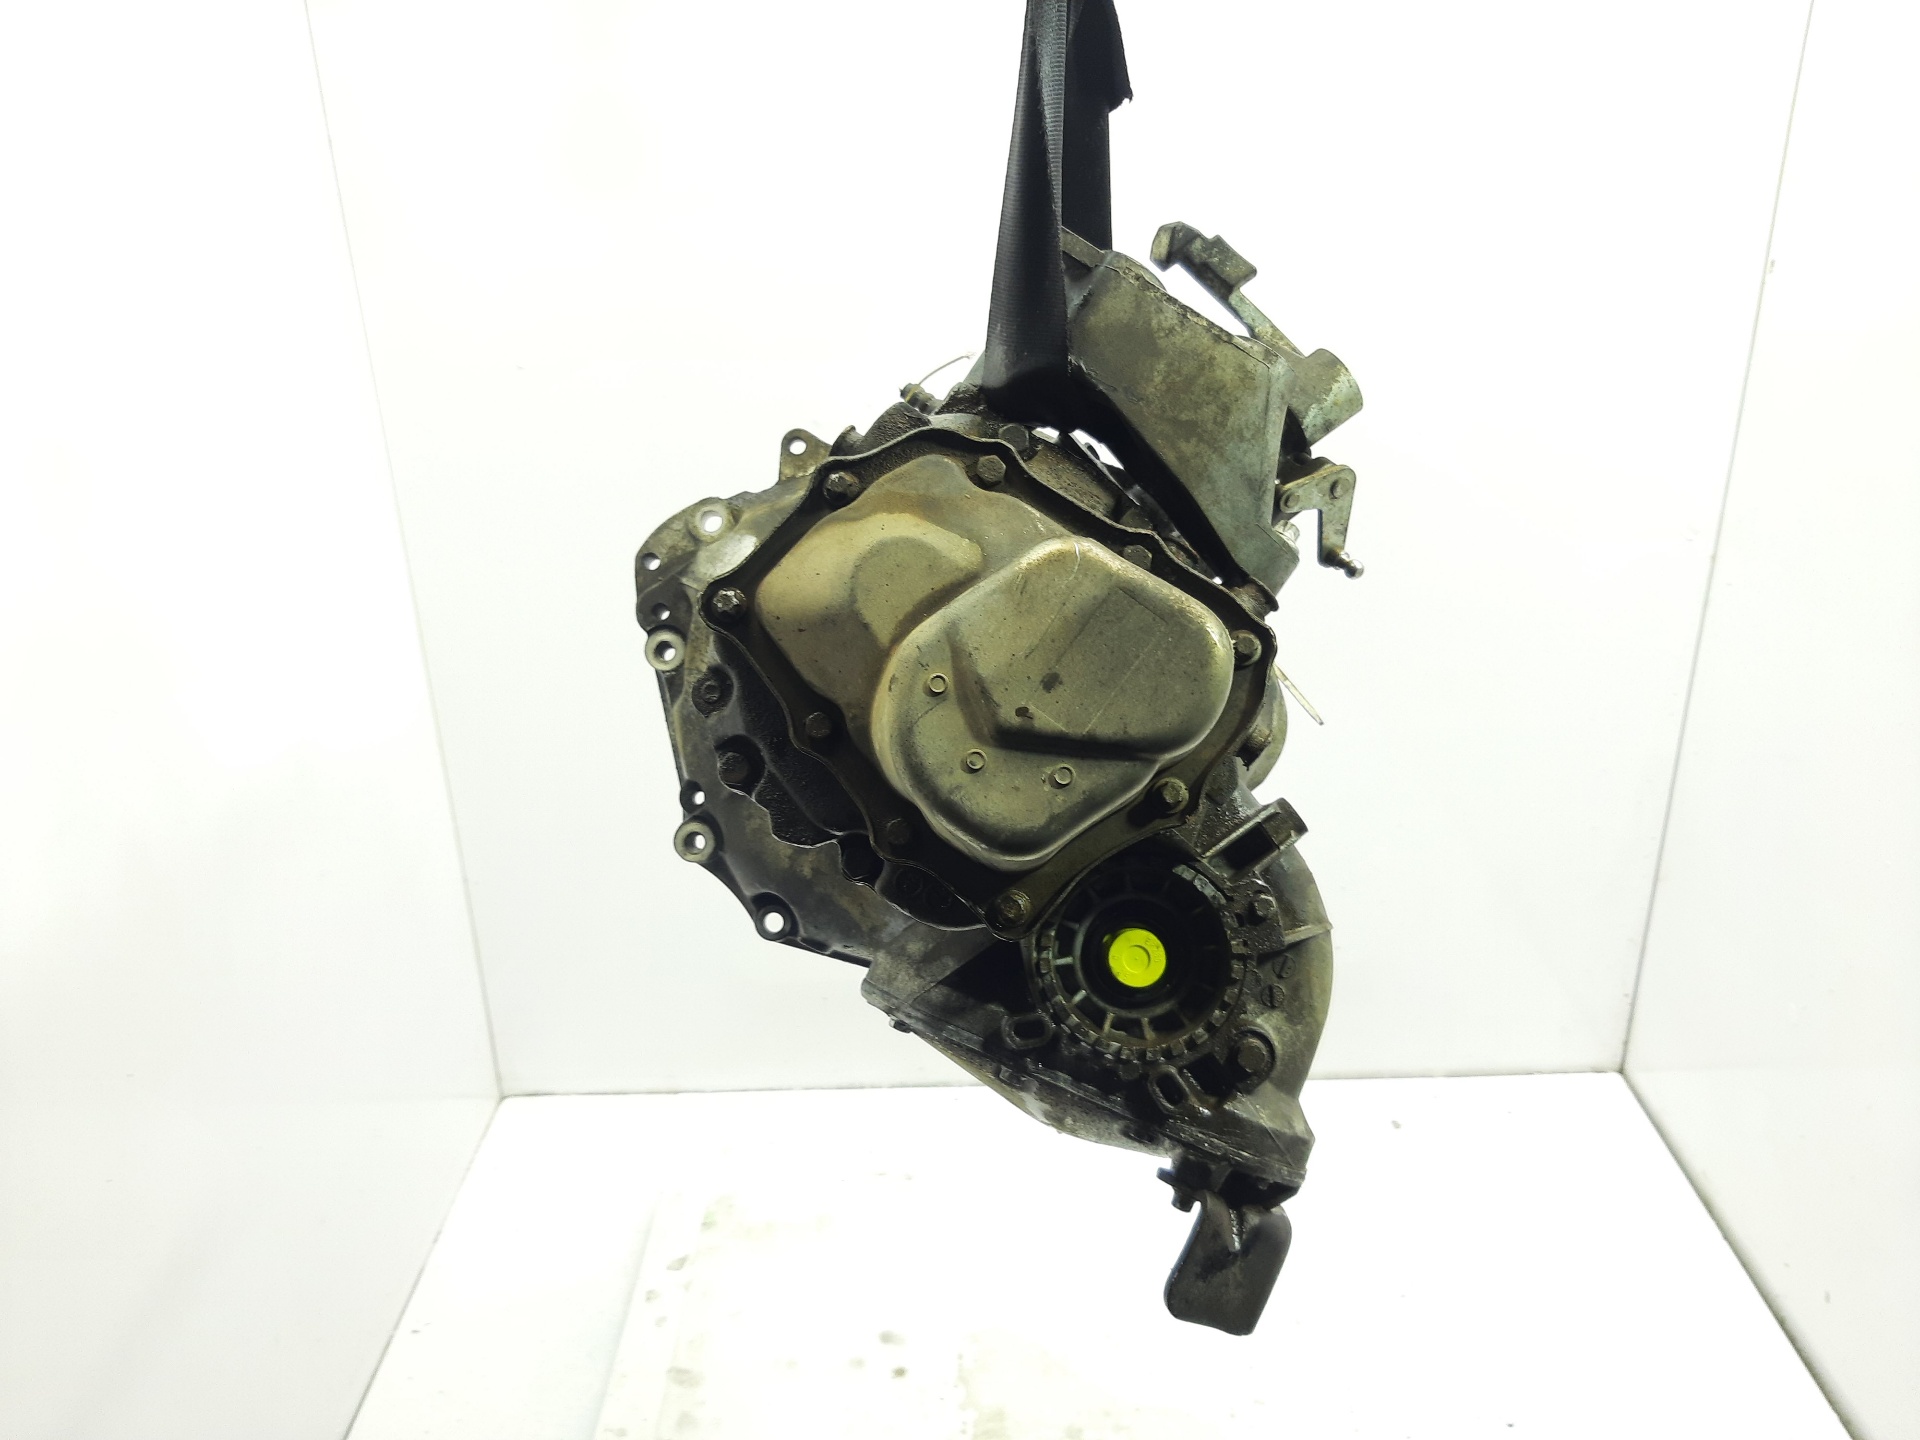 OPEL Vectra 7 generation (2005-2015) Gearbox F17C374, 5VELOCIDADES 24787081